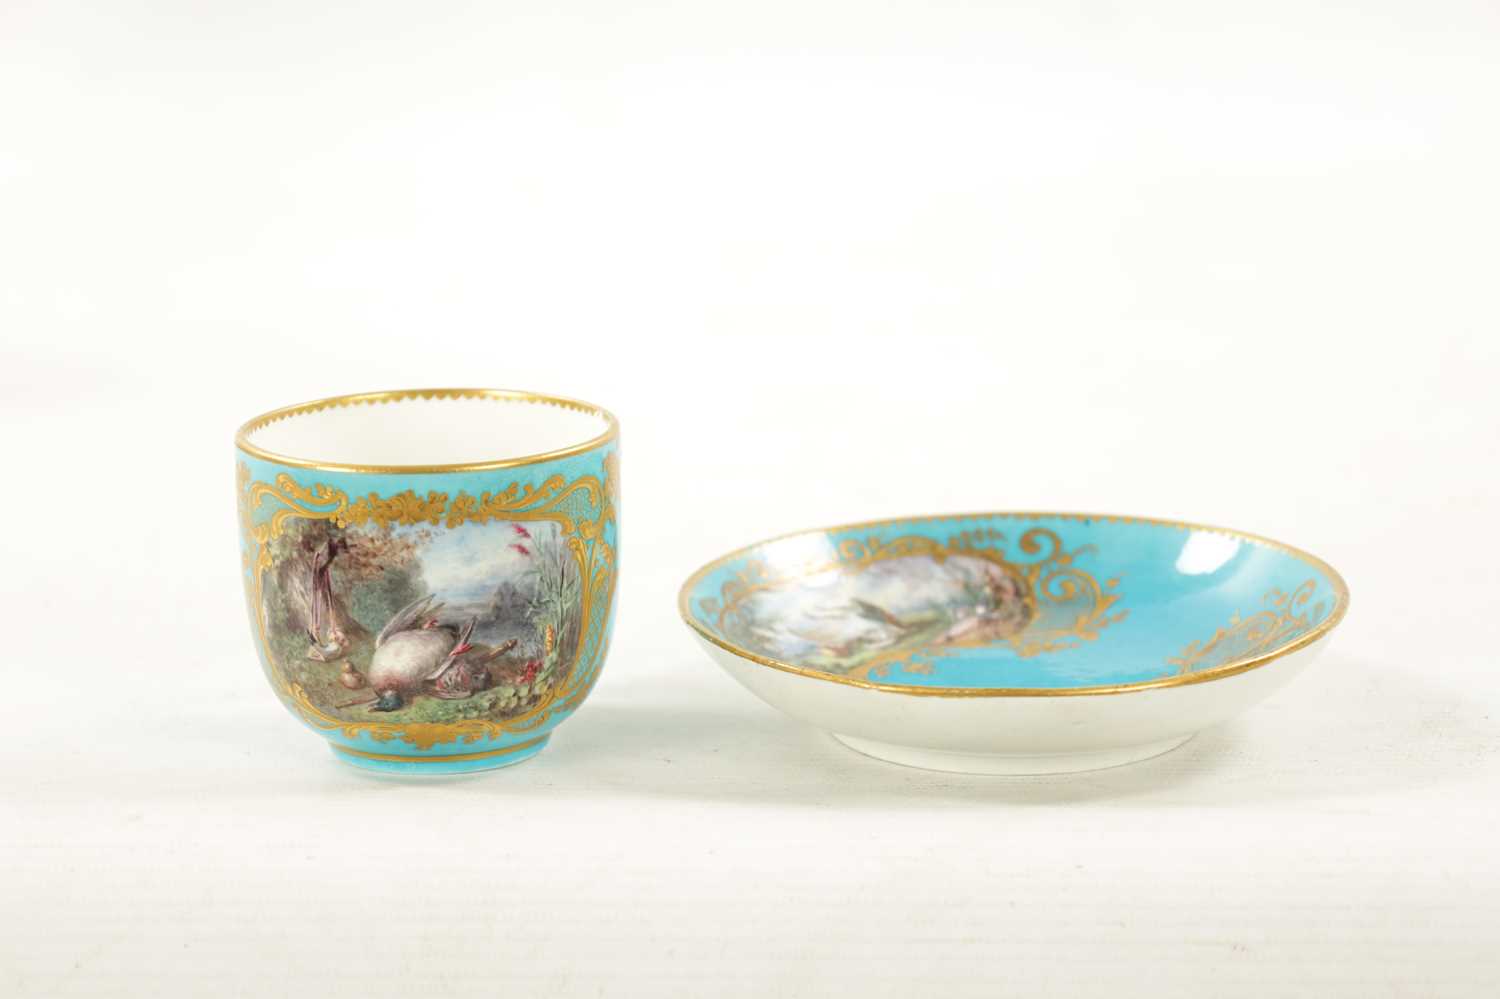 A FINE LATE 18TH / 19TH CENTURY SEVRES PORCELAIN CUP AND SAUCER - Image 6 of 13